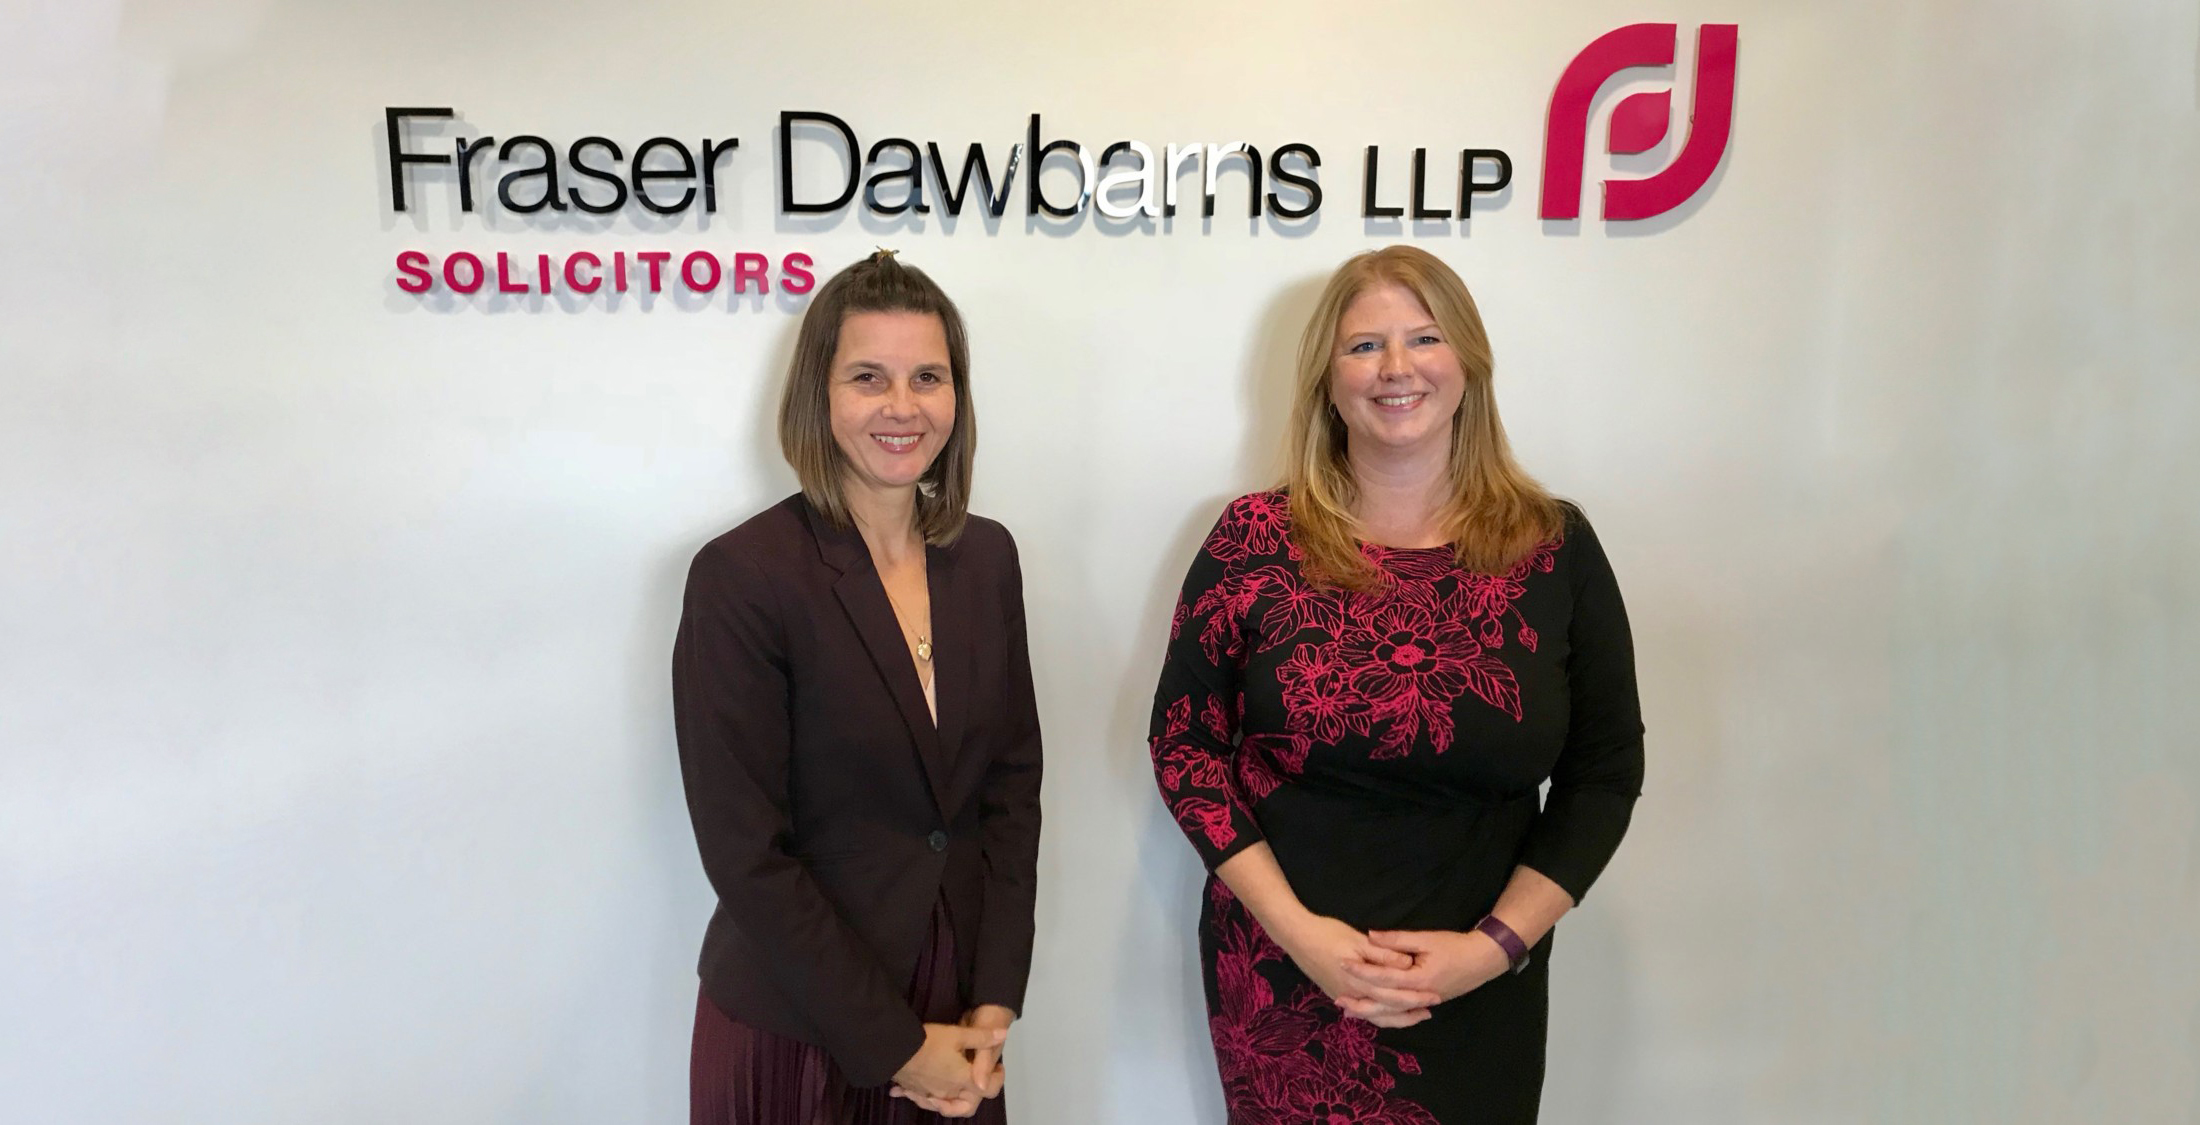 Fraser Dawbarns Welcomes a New Family Lawyer to Ely Image